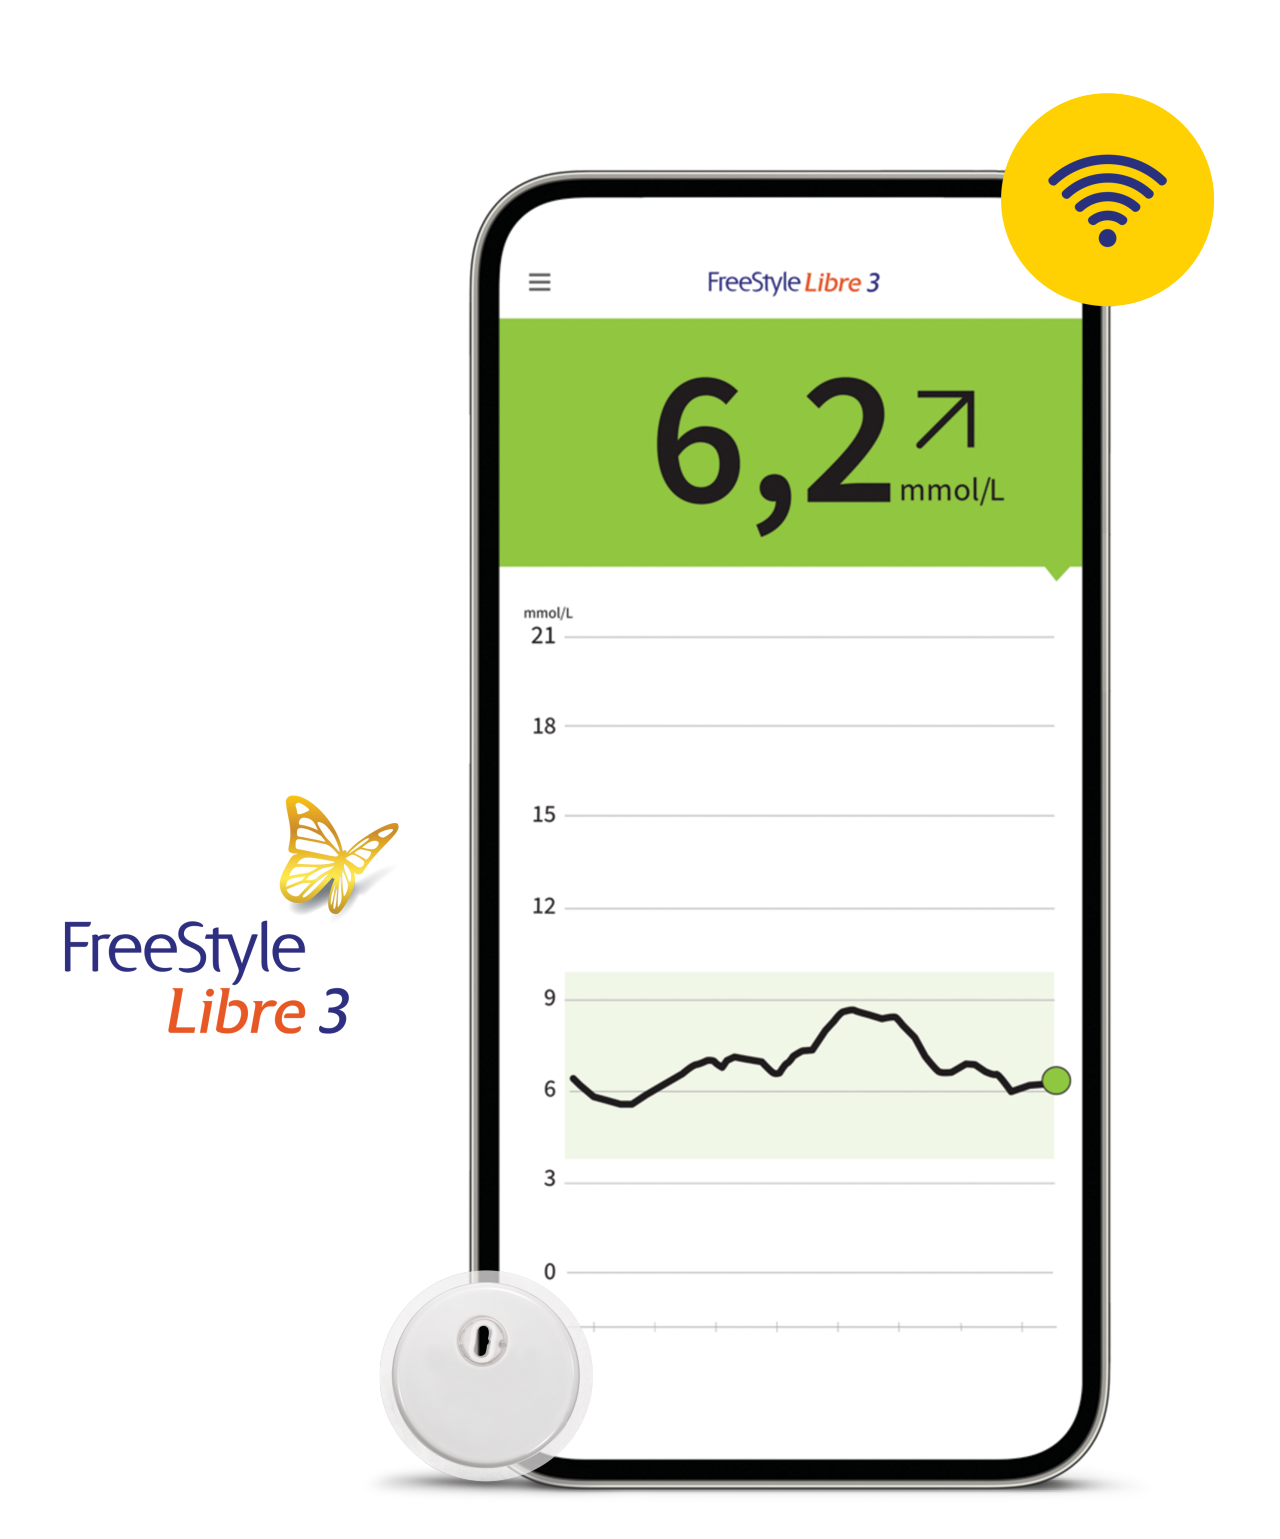 FreeStyle Libre 3 systemet